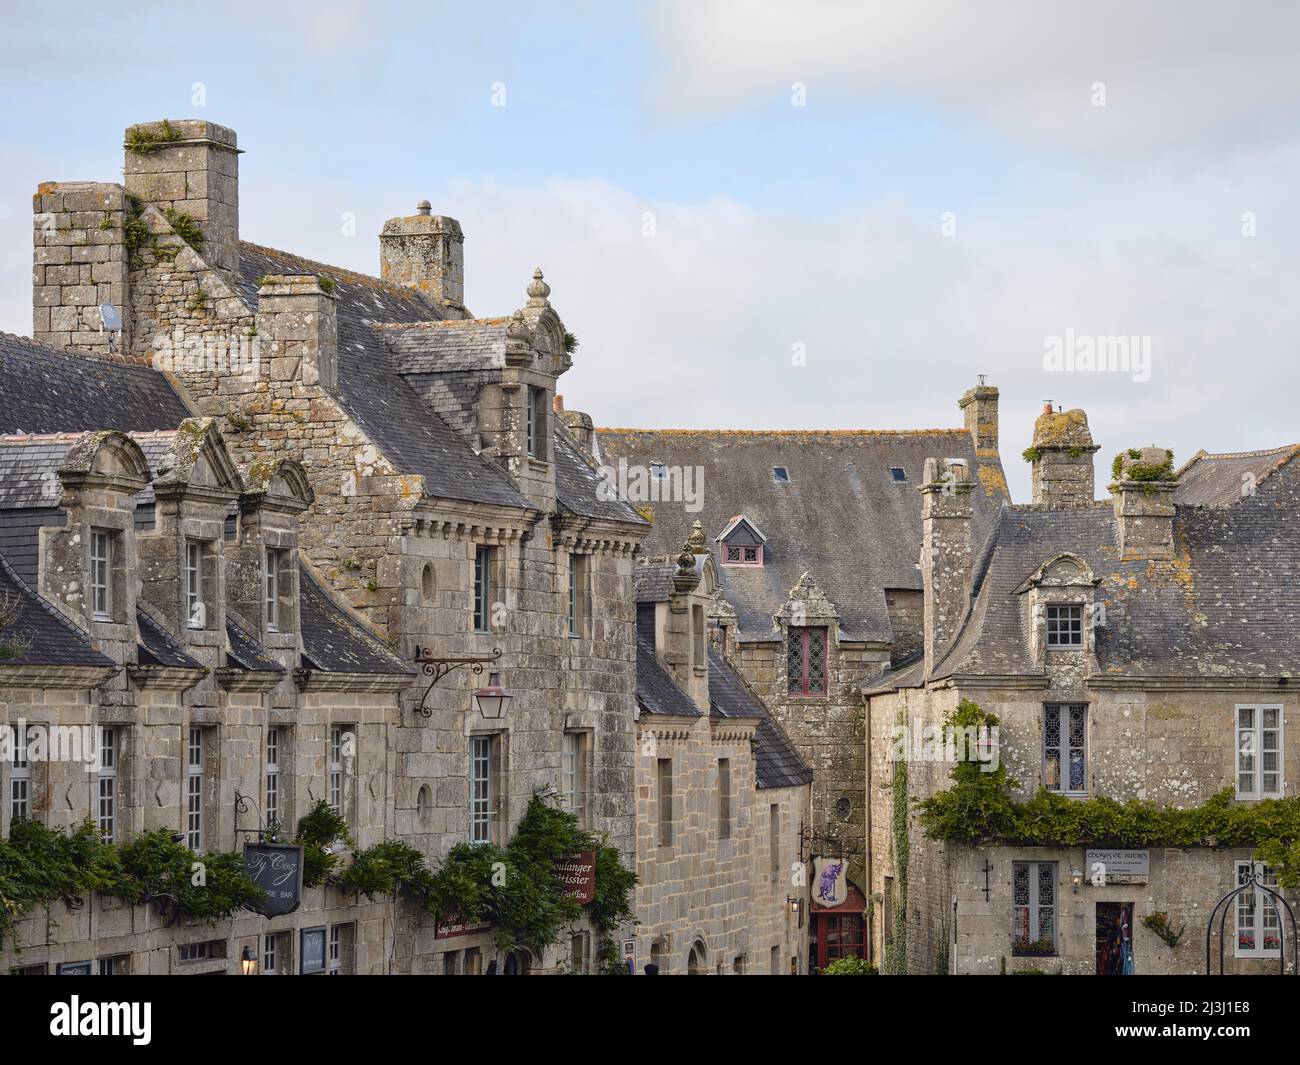 Facades of houses in the village of Locronan in the department of Finistère in Brittany. The houses were built of granite and date back to the 17th century. Locronan's historic setting is featured in many film and television productions. Locronan is a very popular destination for excursions. Stock Photo